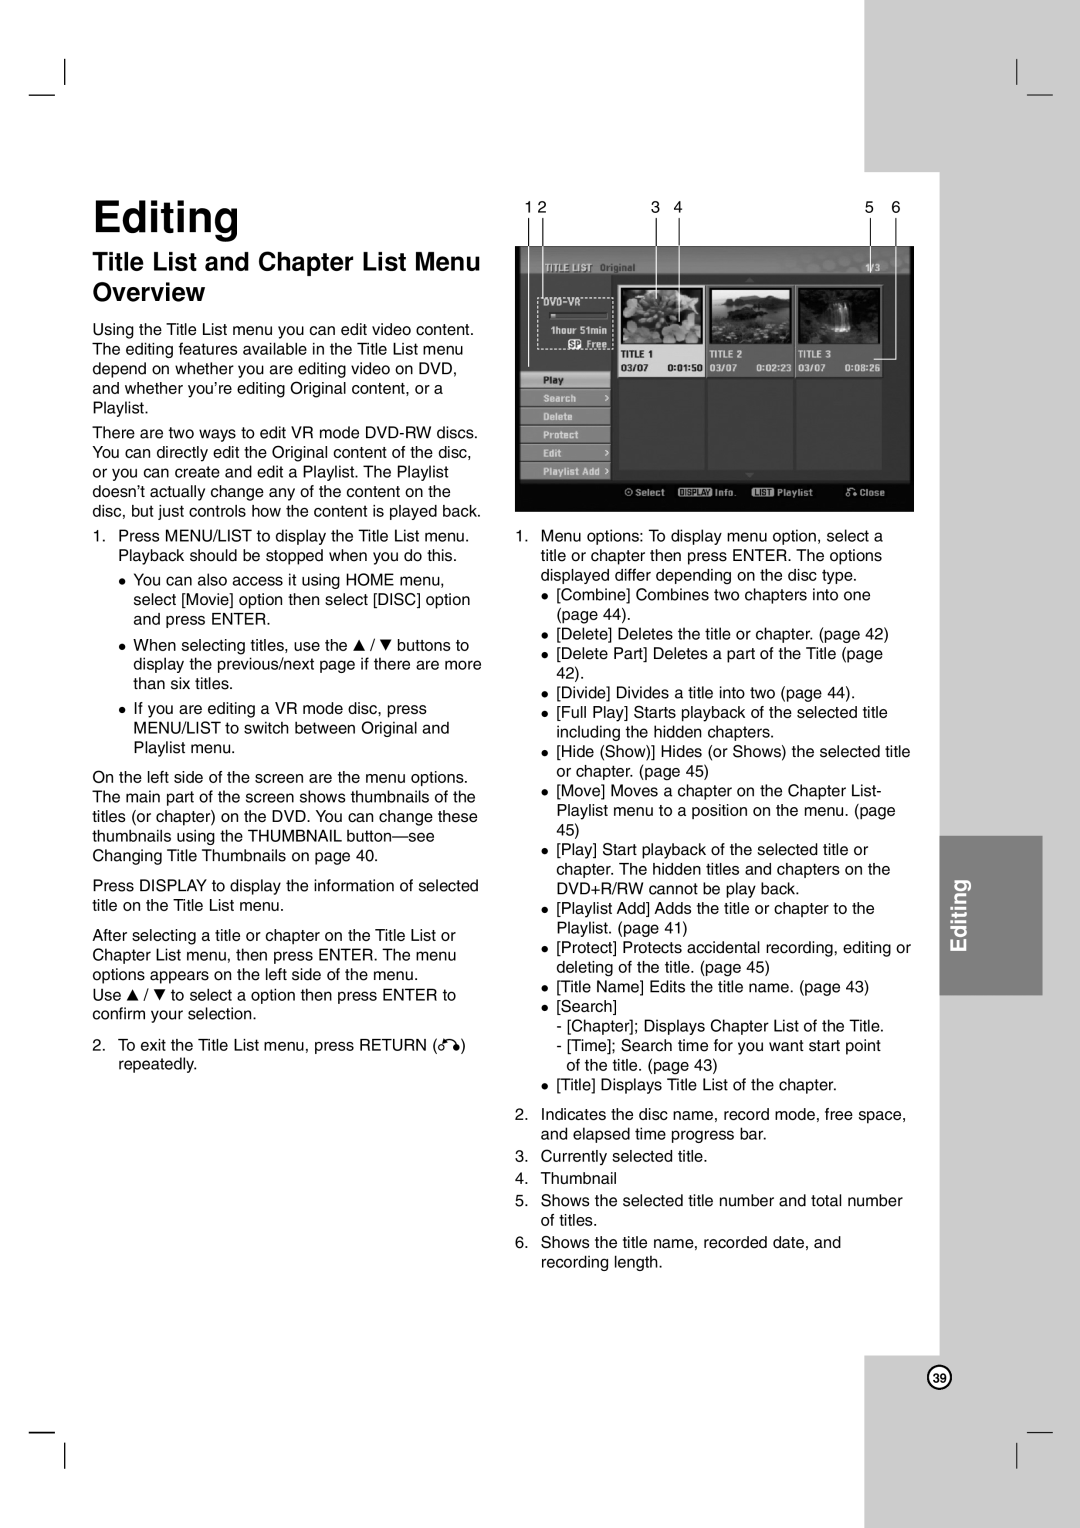 LG Electronics DR1F9H owner manual Editing, Title List and Chapter List Menu Overview 